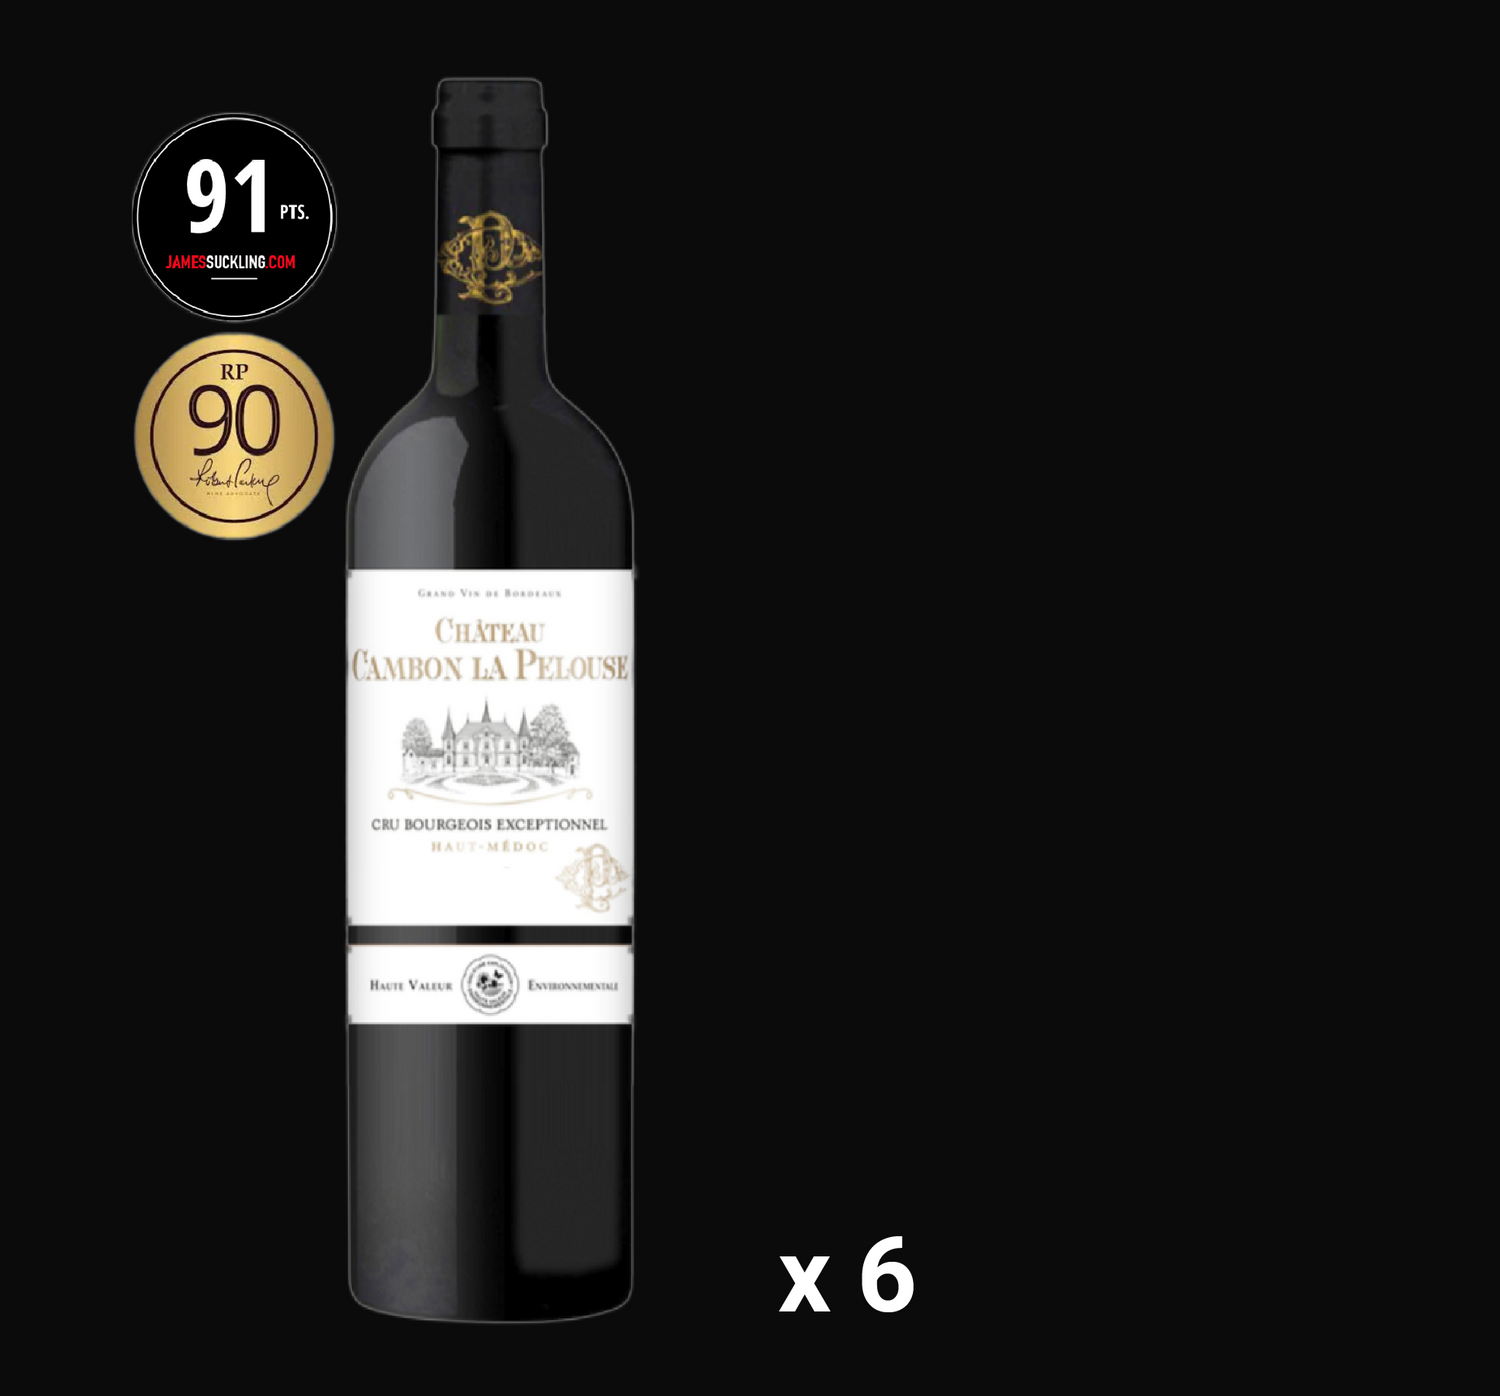 Haut-Medoc Cru Bourgeois Exceptionnel